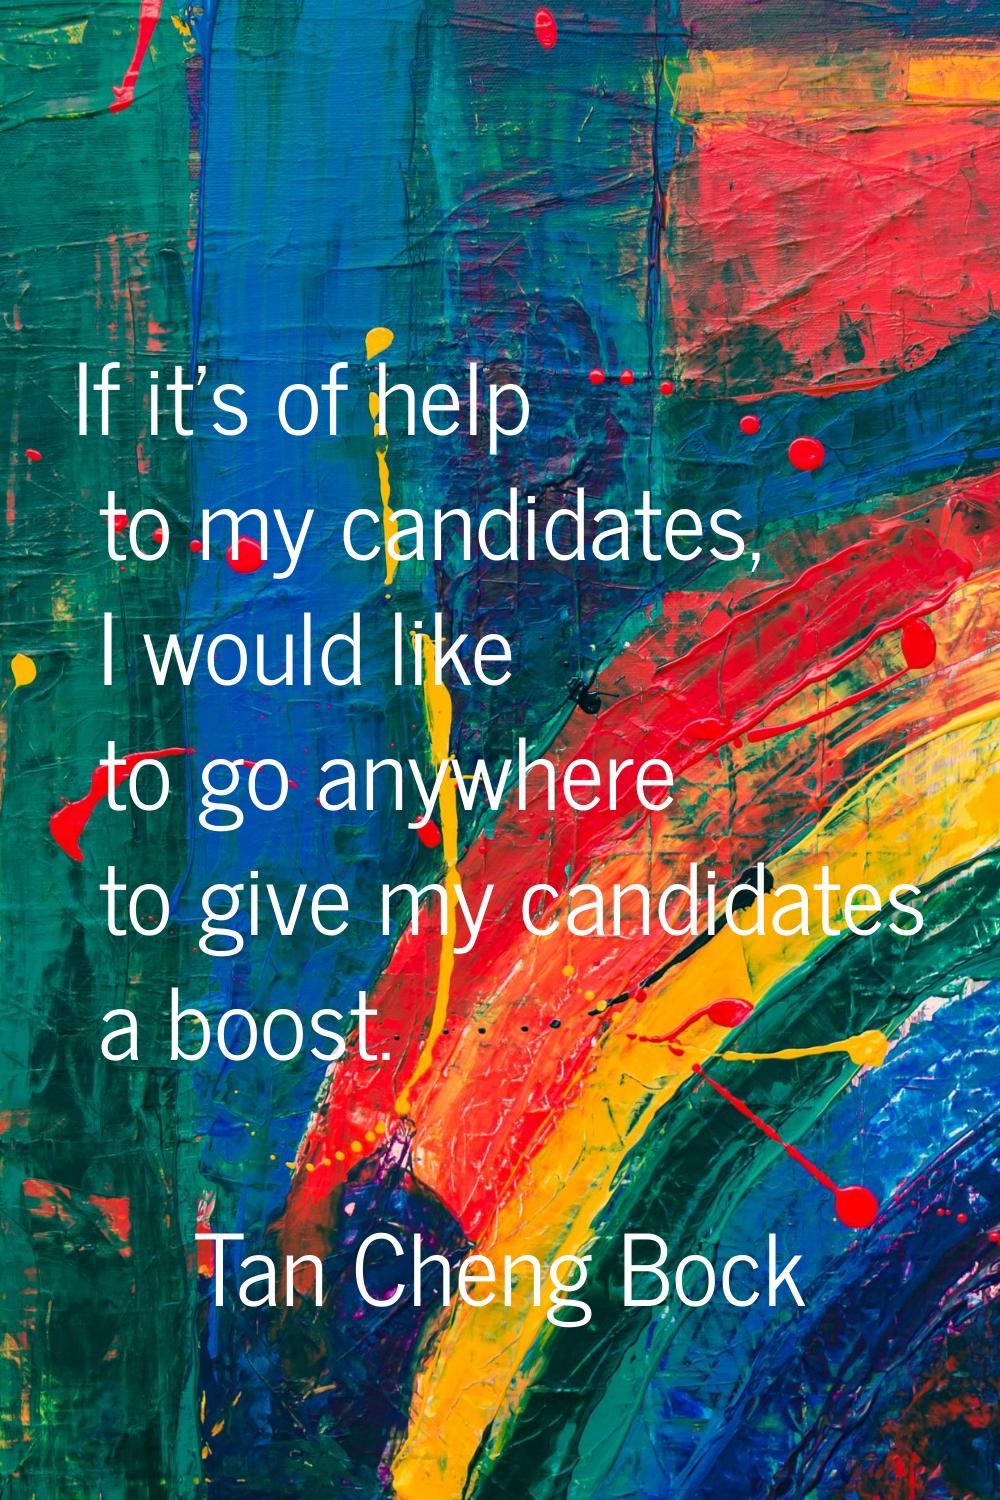 If it's of help to my candidates, I would like to go anywhere to give my candidates a boost.